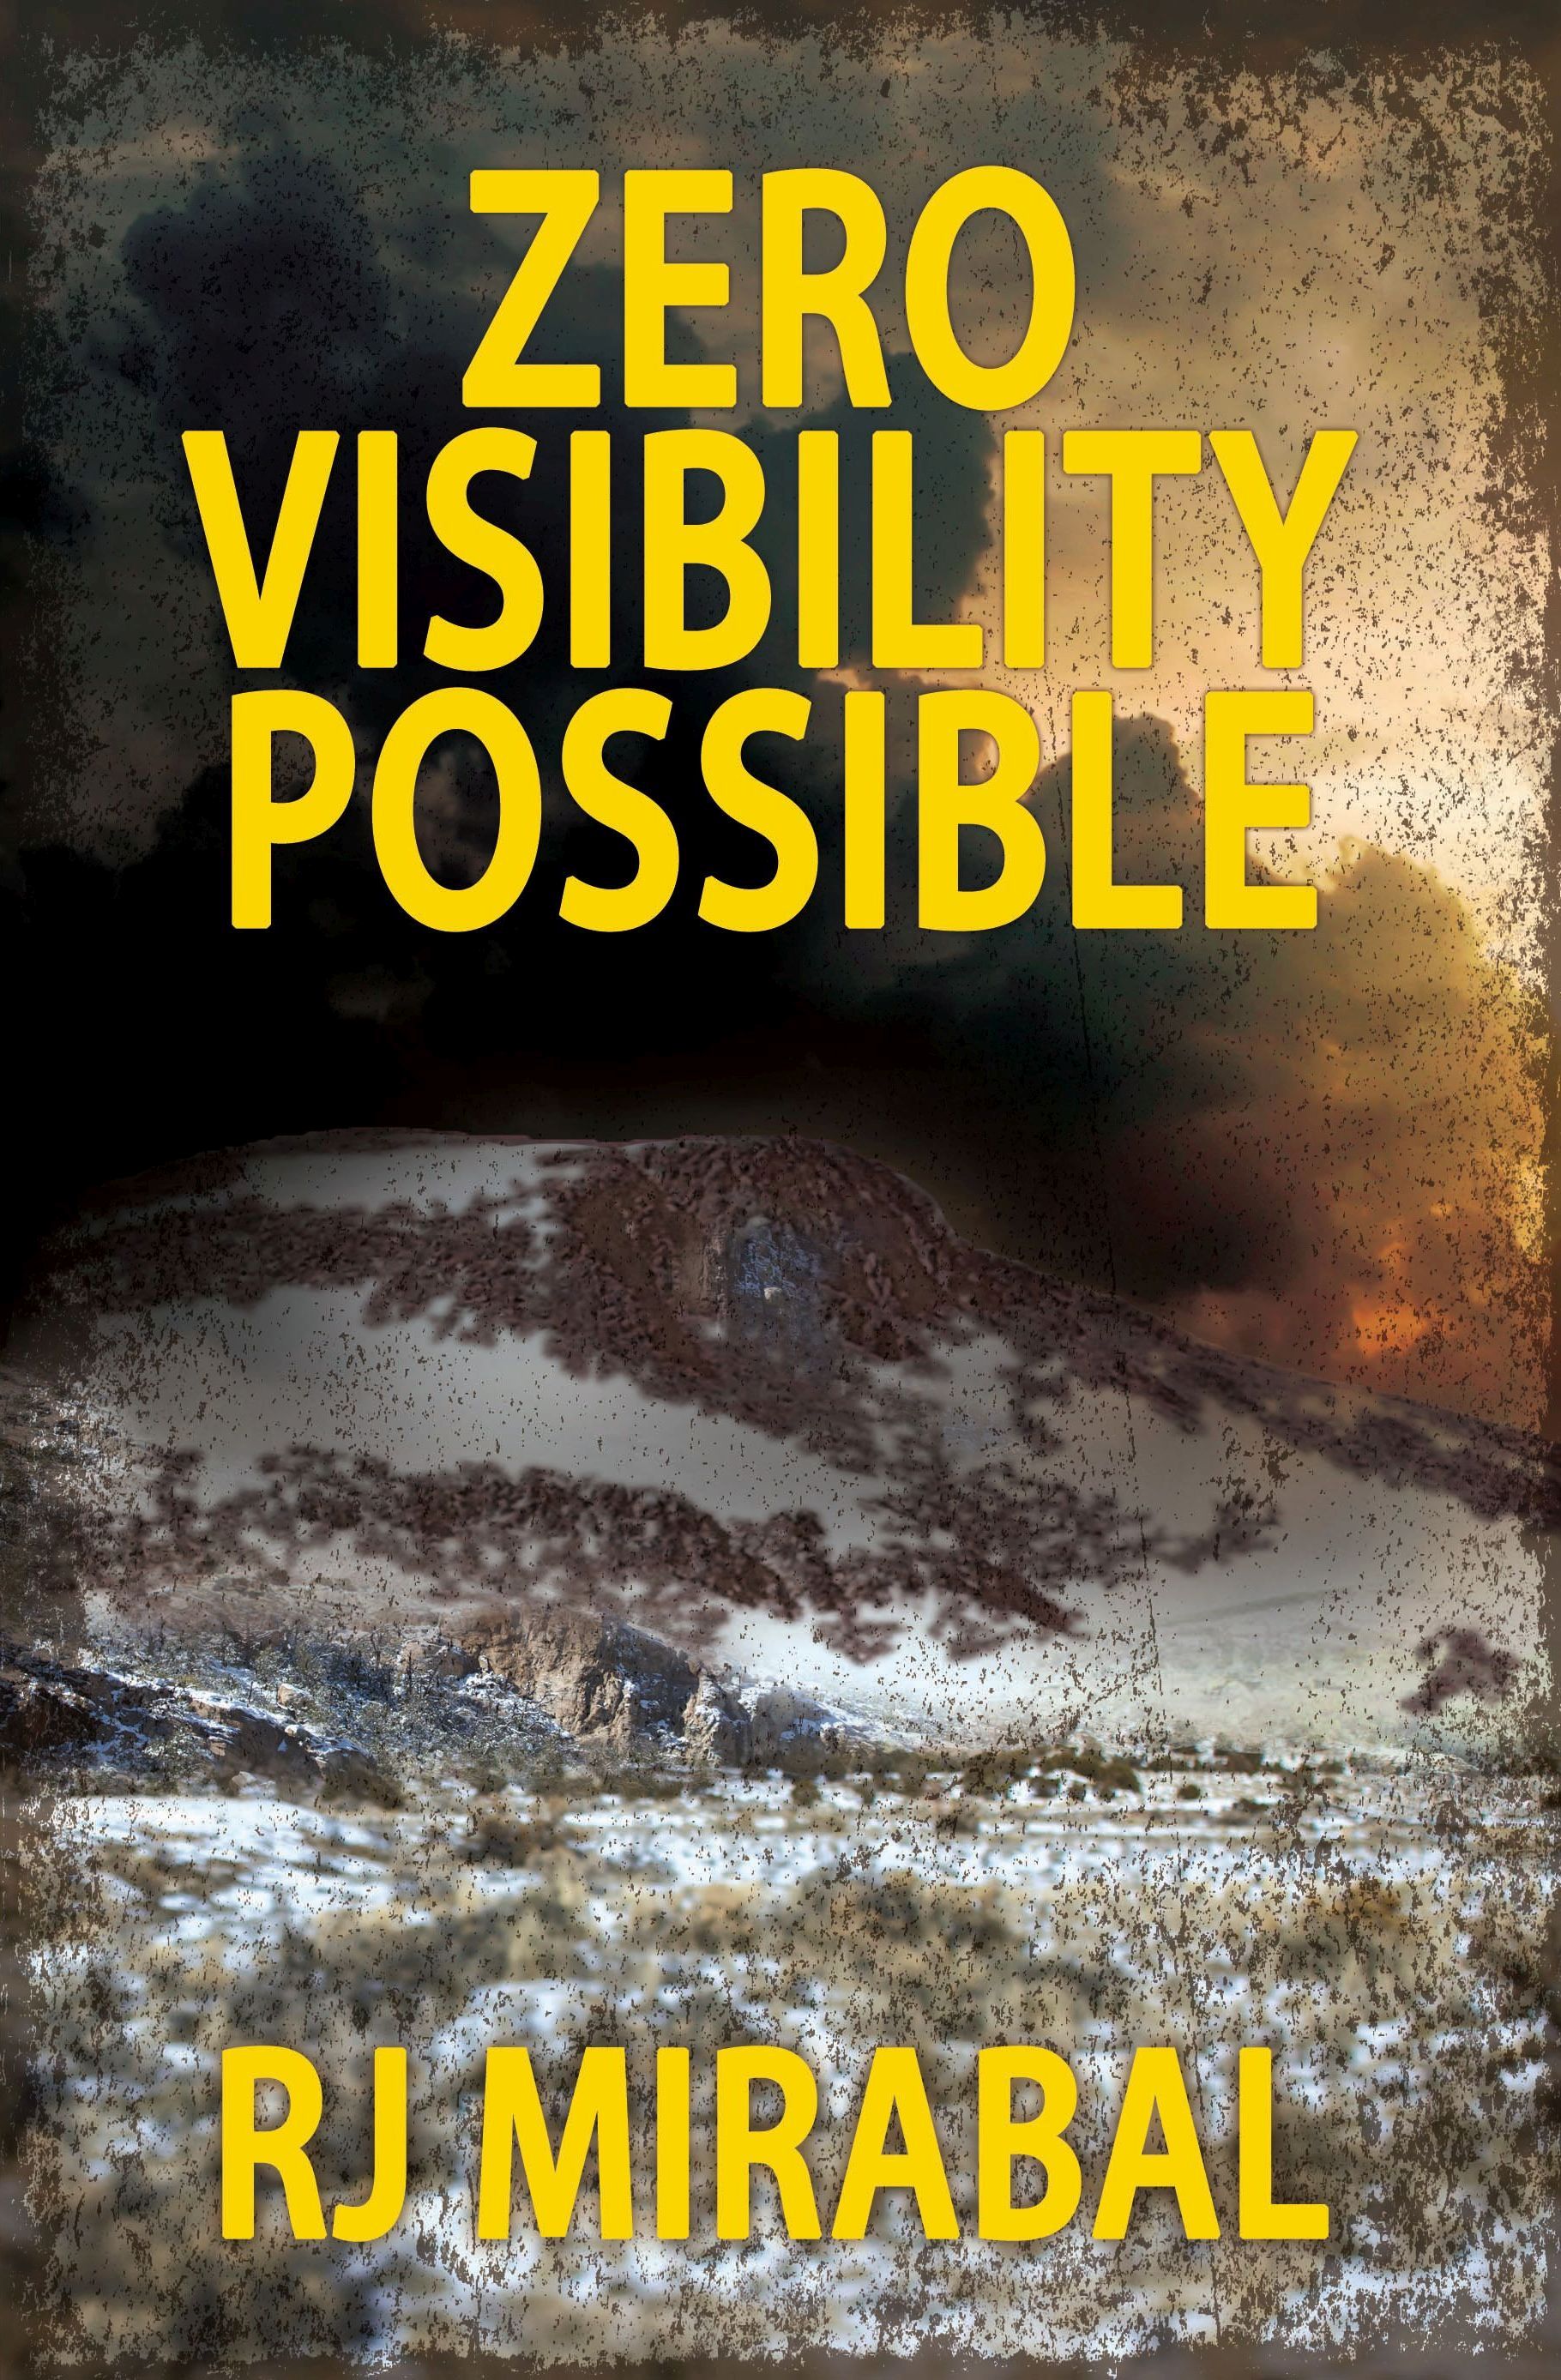 Zero Visibility Possible FRONT cover FINAL